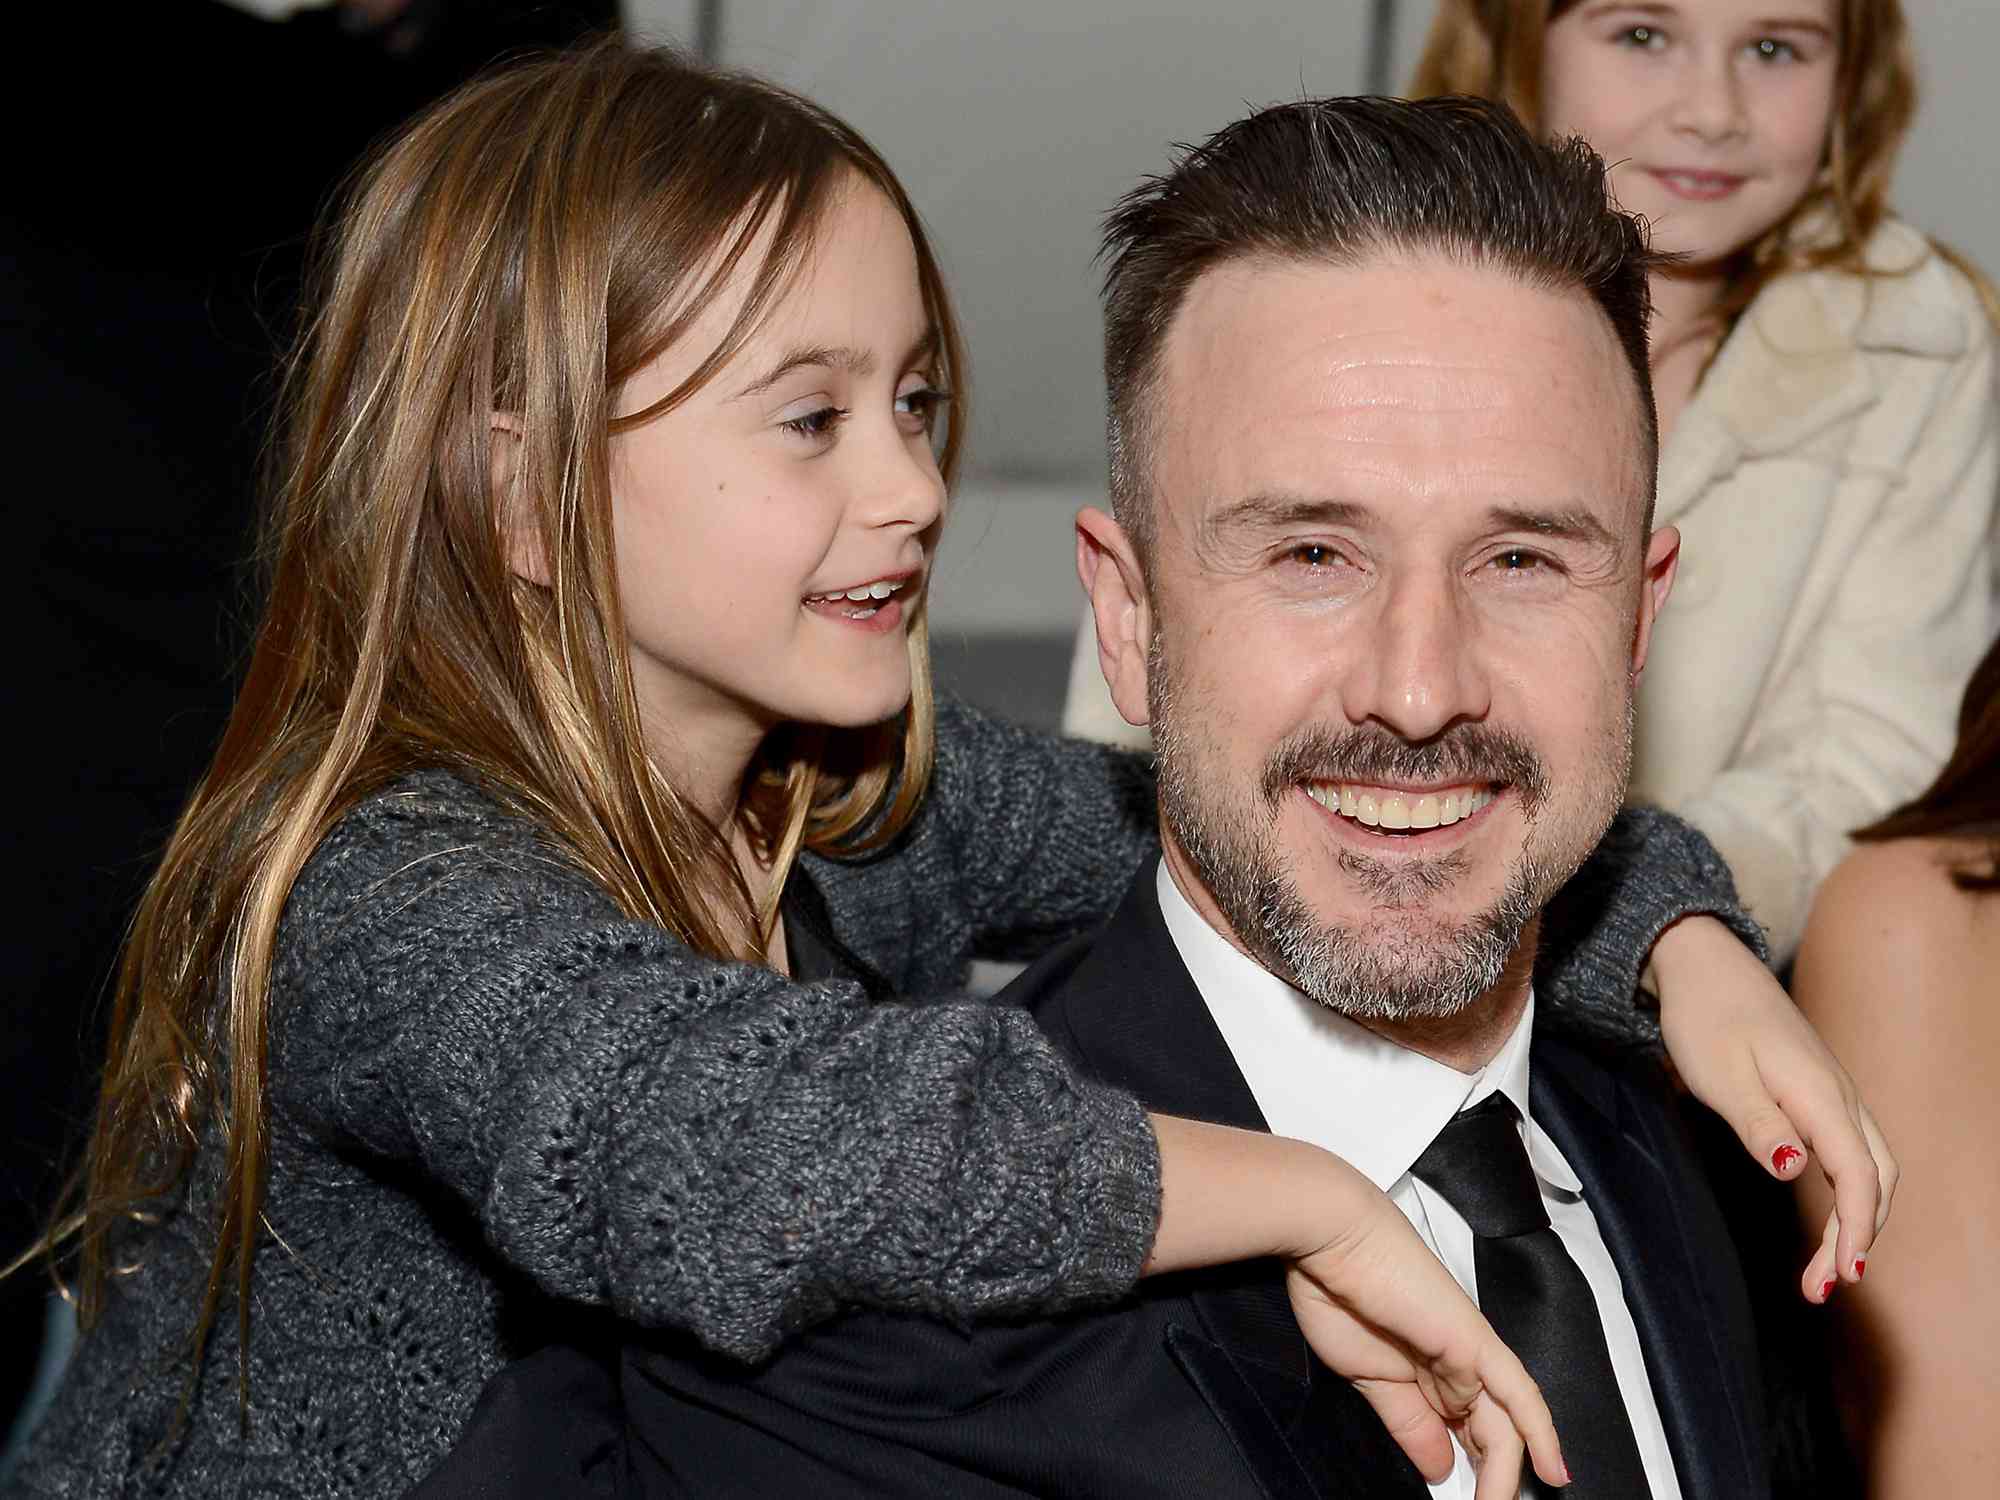 David Arquette (R) and Coco Arquette attend The Art of Elysium's 6th Annual HEAVEN Gala presented by Audi at 2nd Street Tunnel on January 12, 2013 in Los Angeles, California